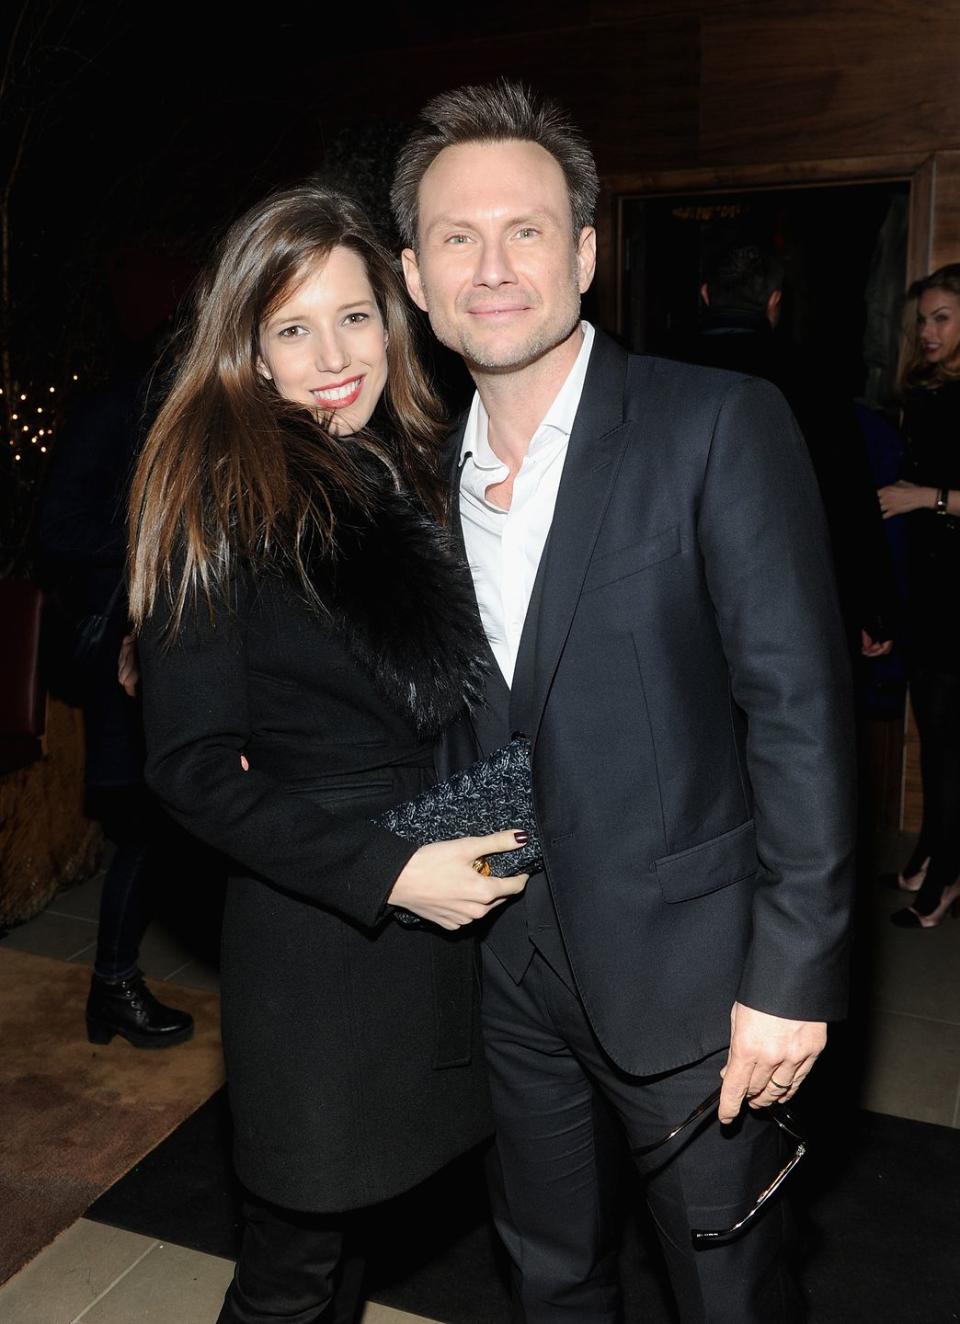 Christian Slater and Brittany Lopez